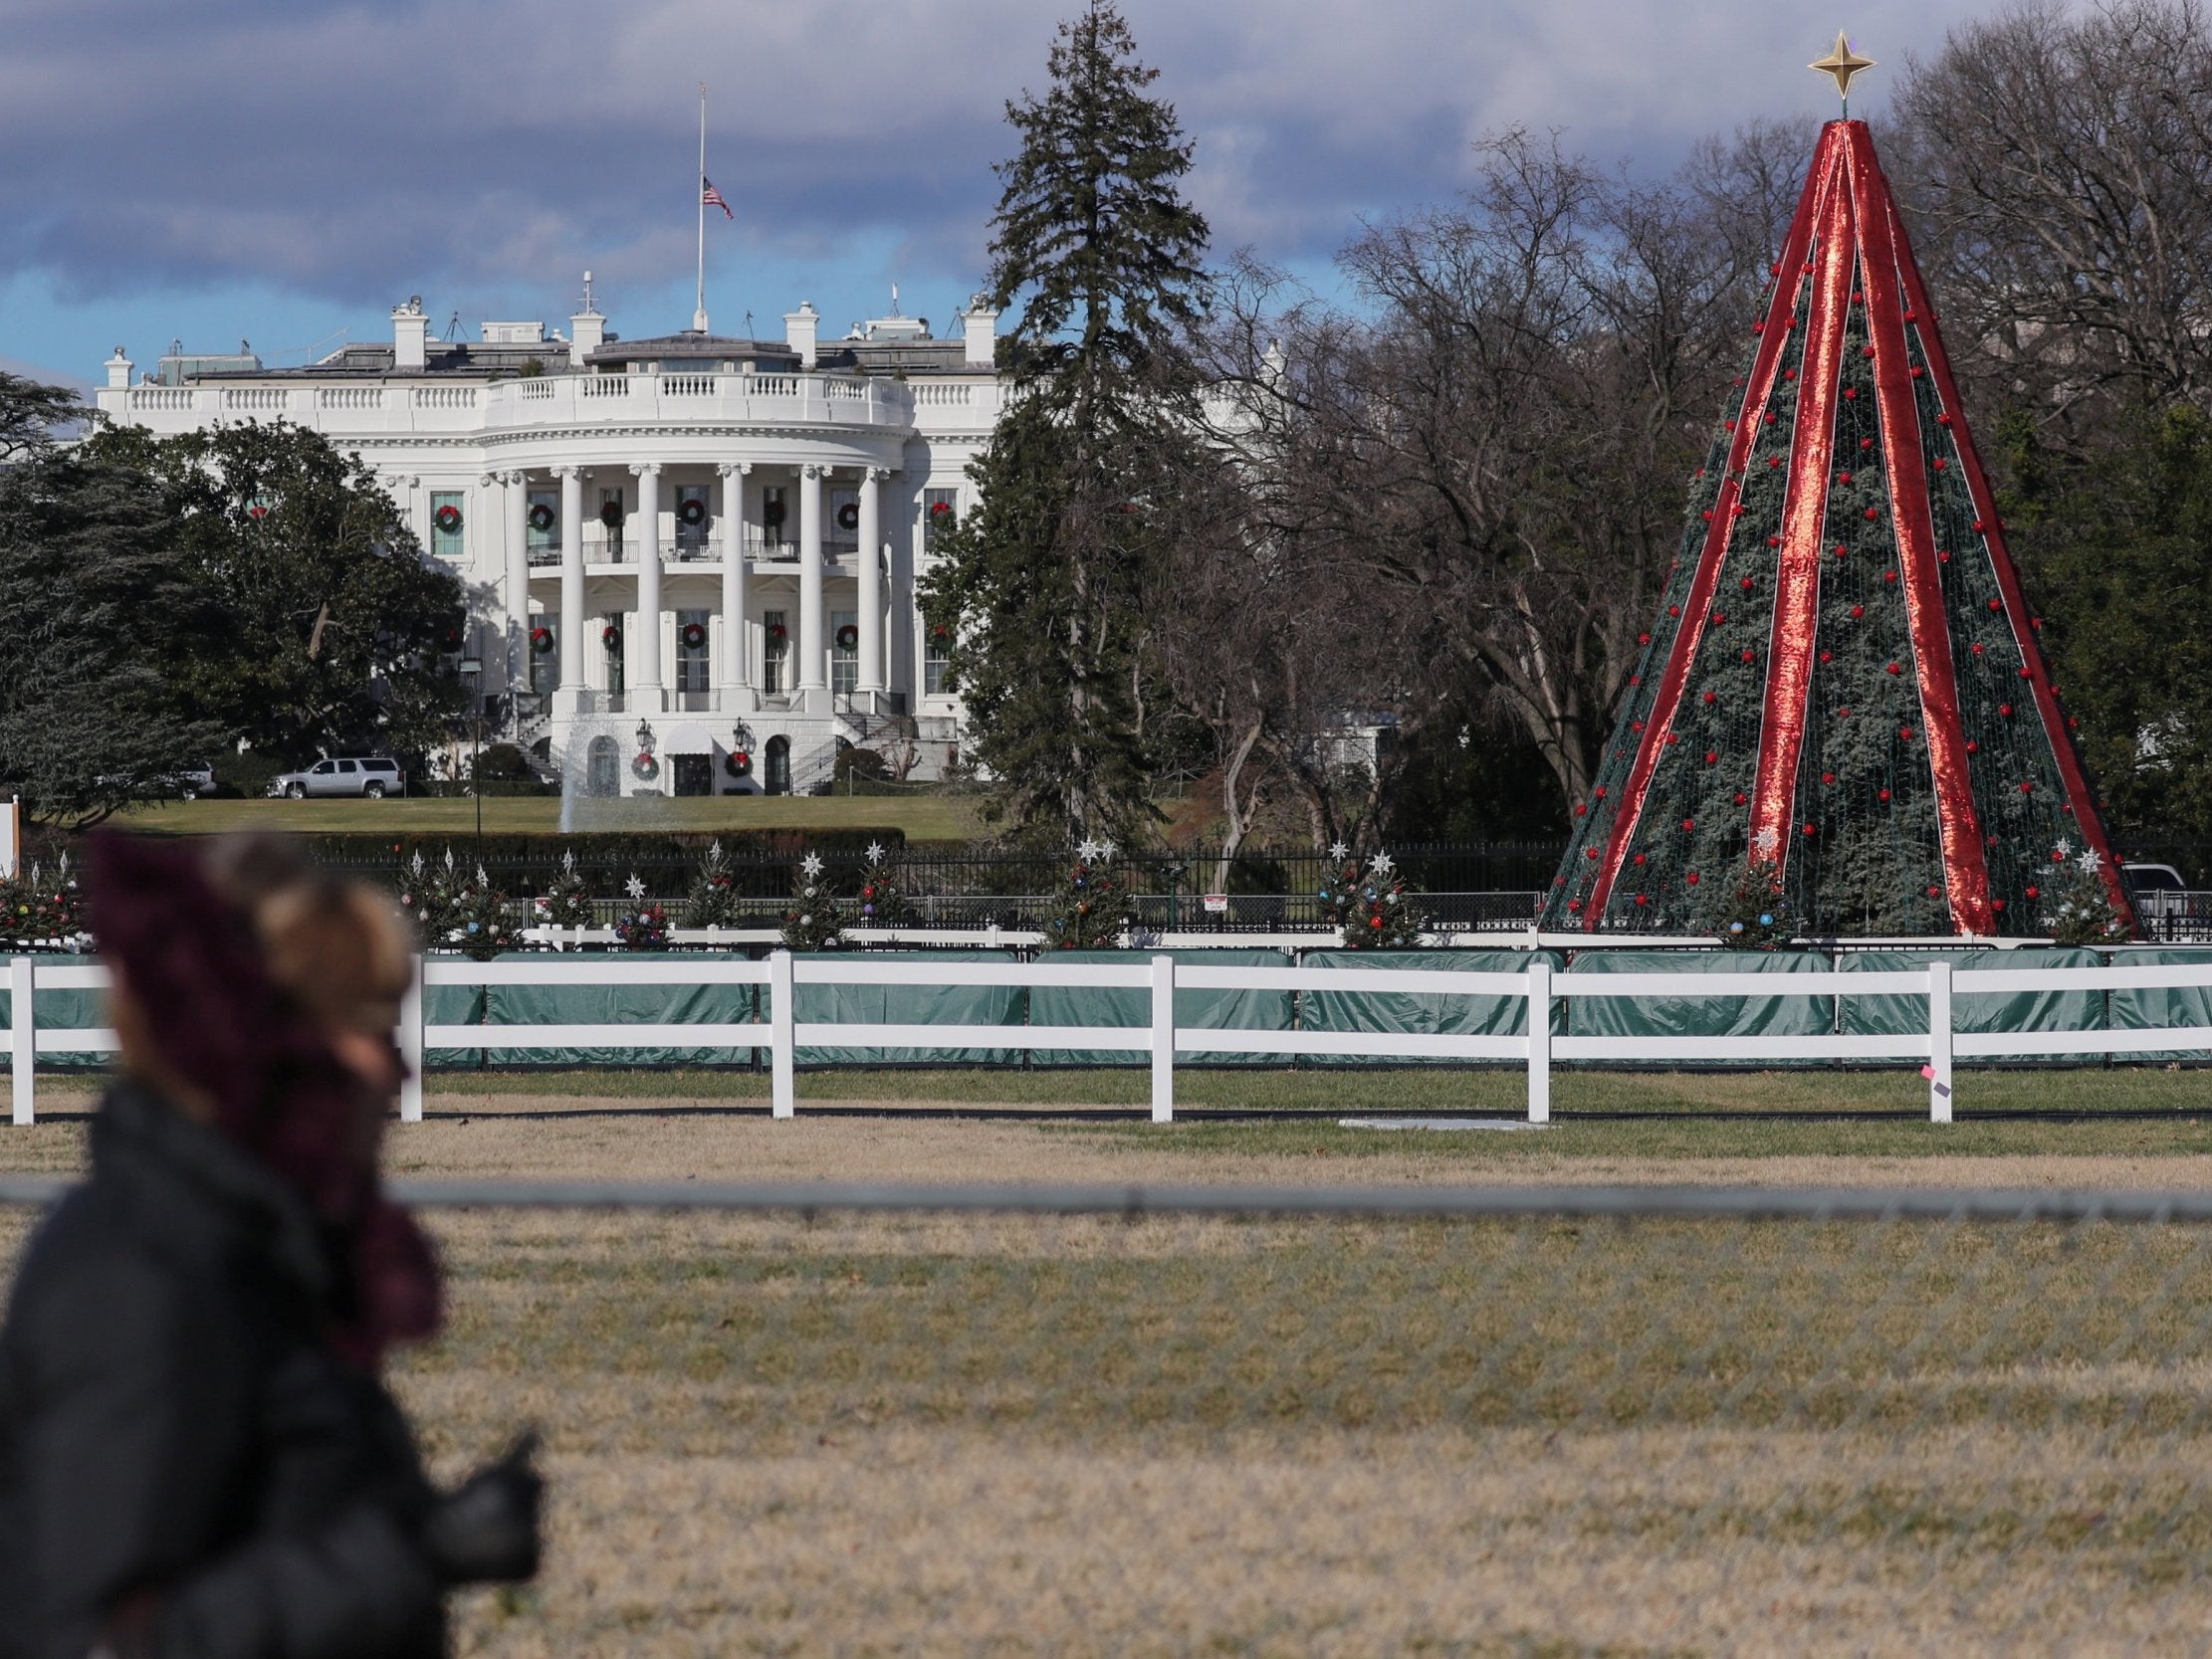 Visitors were unable to visit the National Christmas Tree at the White House due to its closure